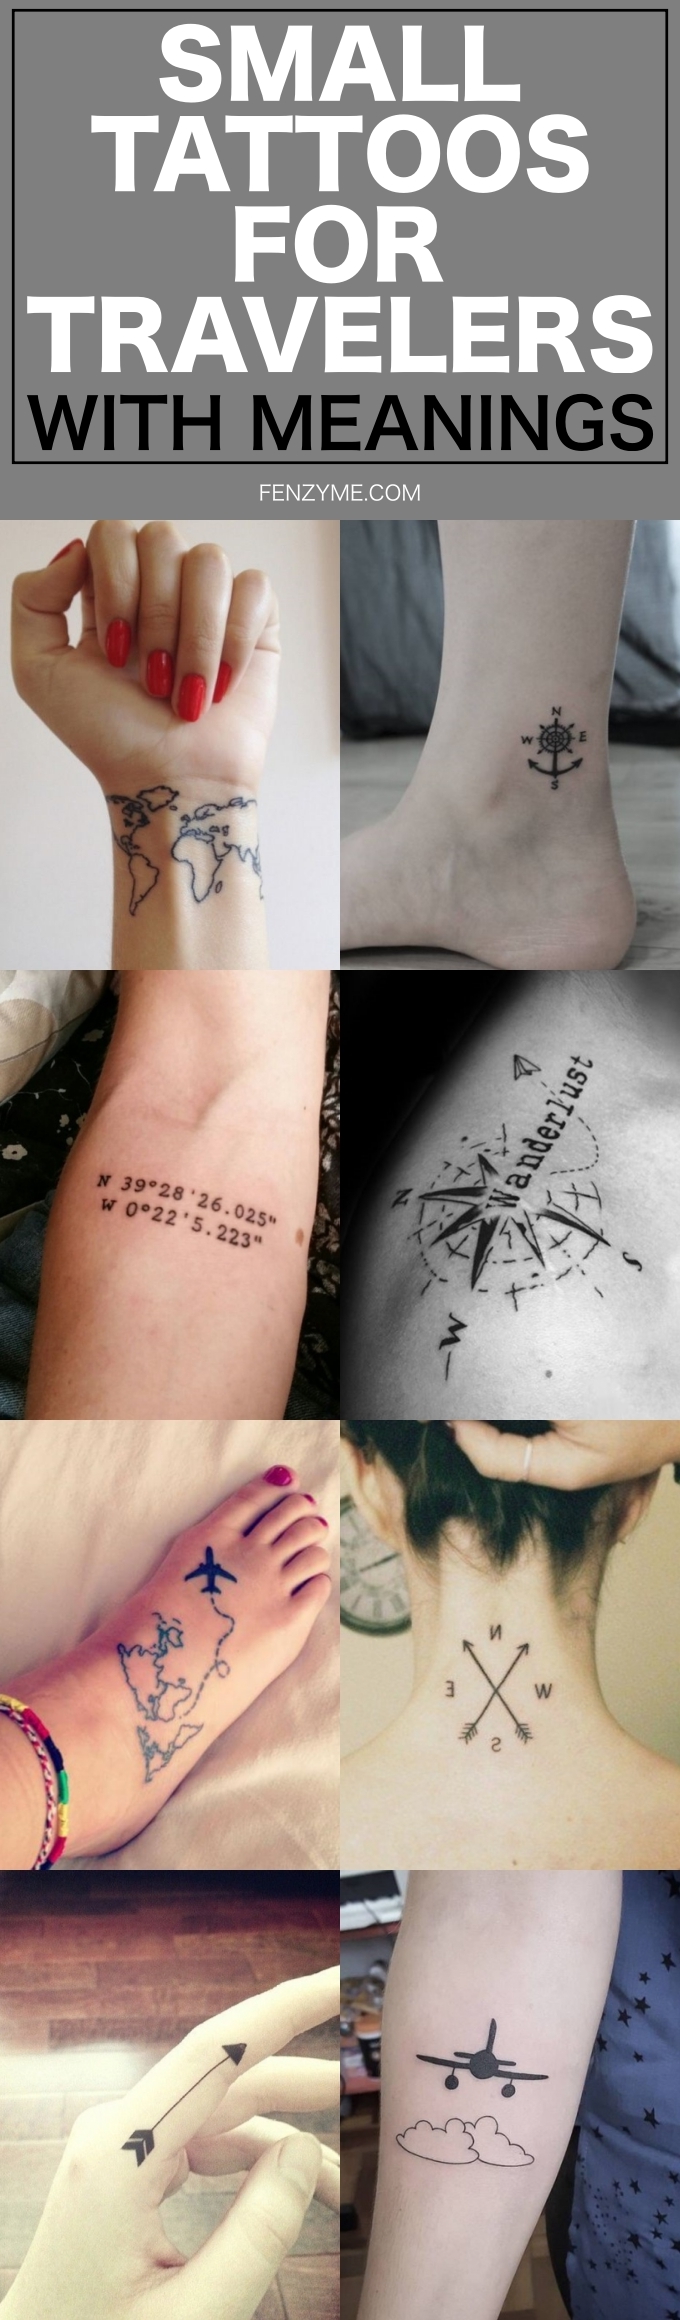 Small Tattoos for Travelers with Meanings